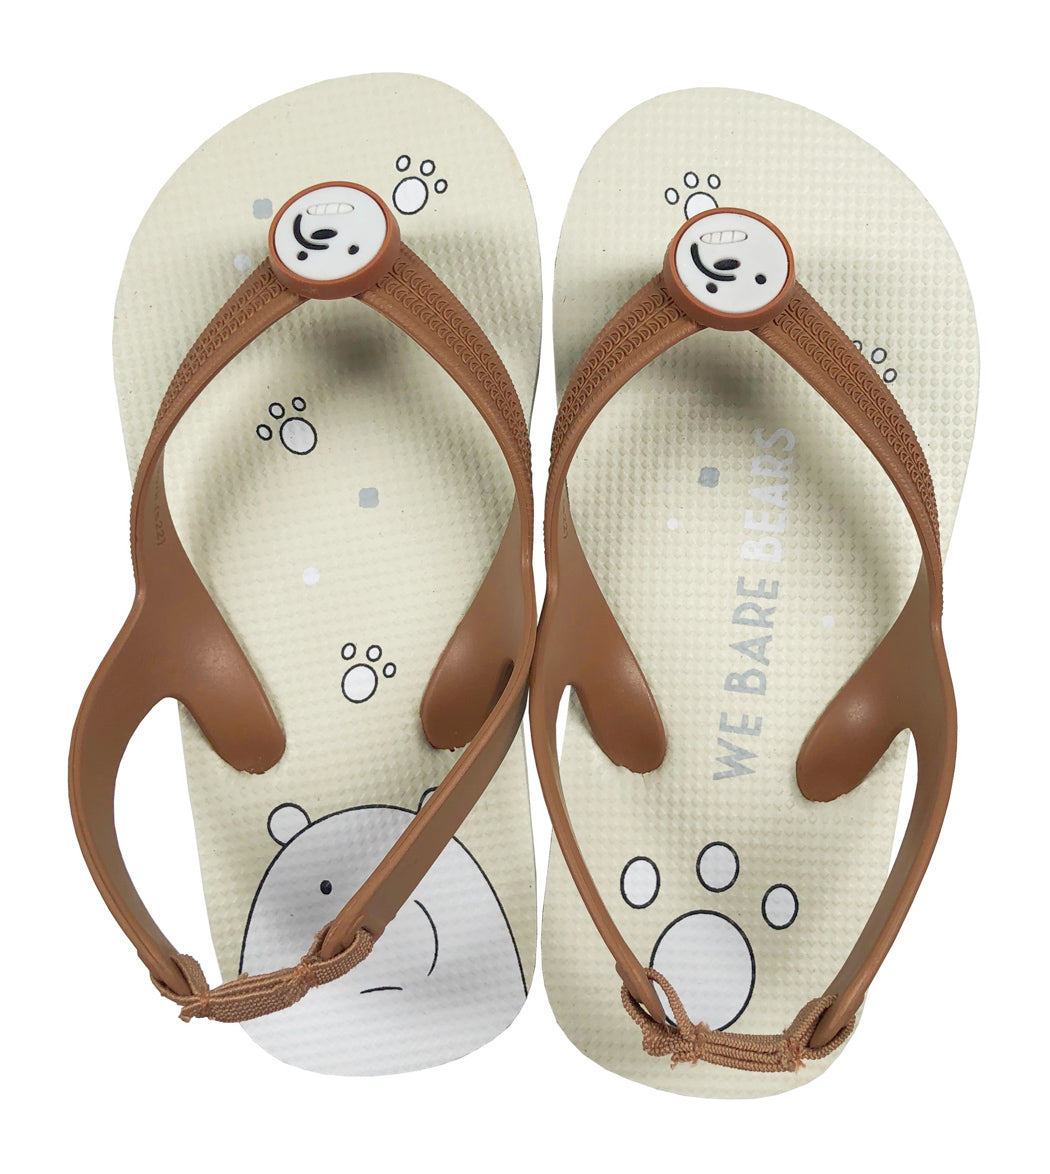 MINISO WE BARE BEARS COLLECTION 5.0 KIDS' SLIPPERS (ICE BEAR,27-28) 2012874315102 KIDS SLIPPERS